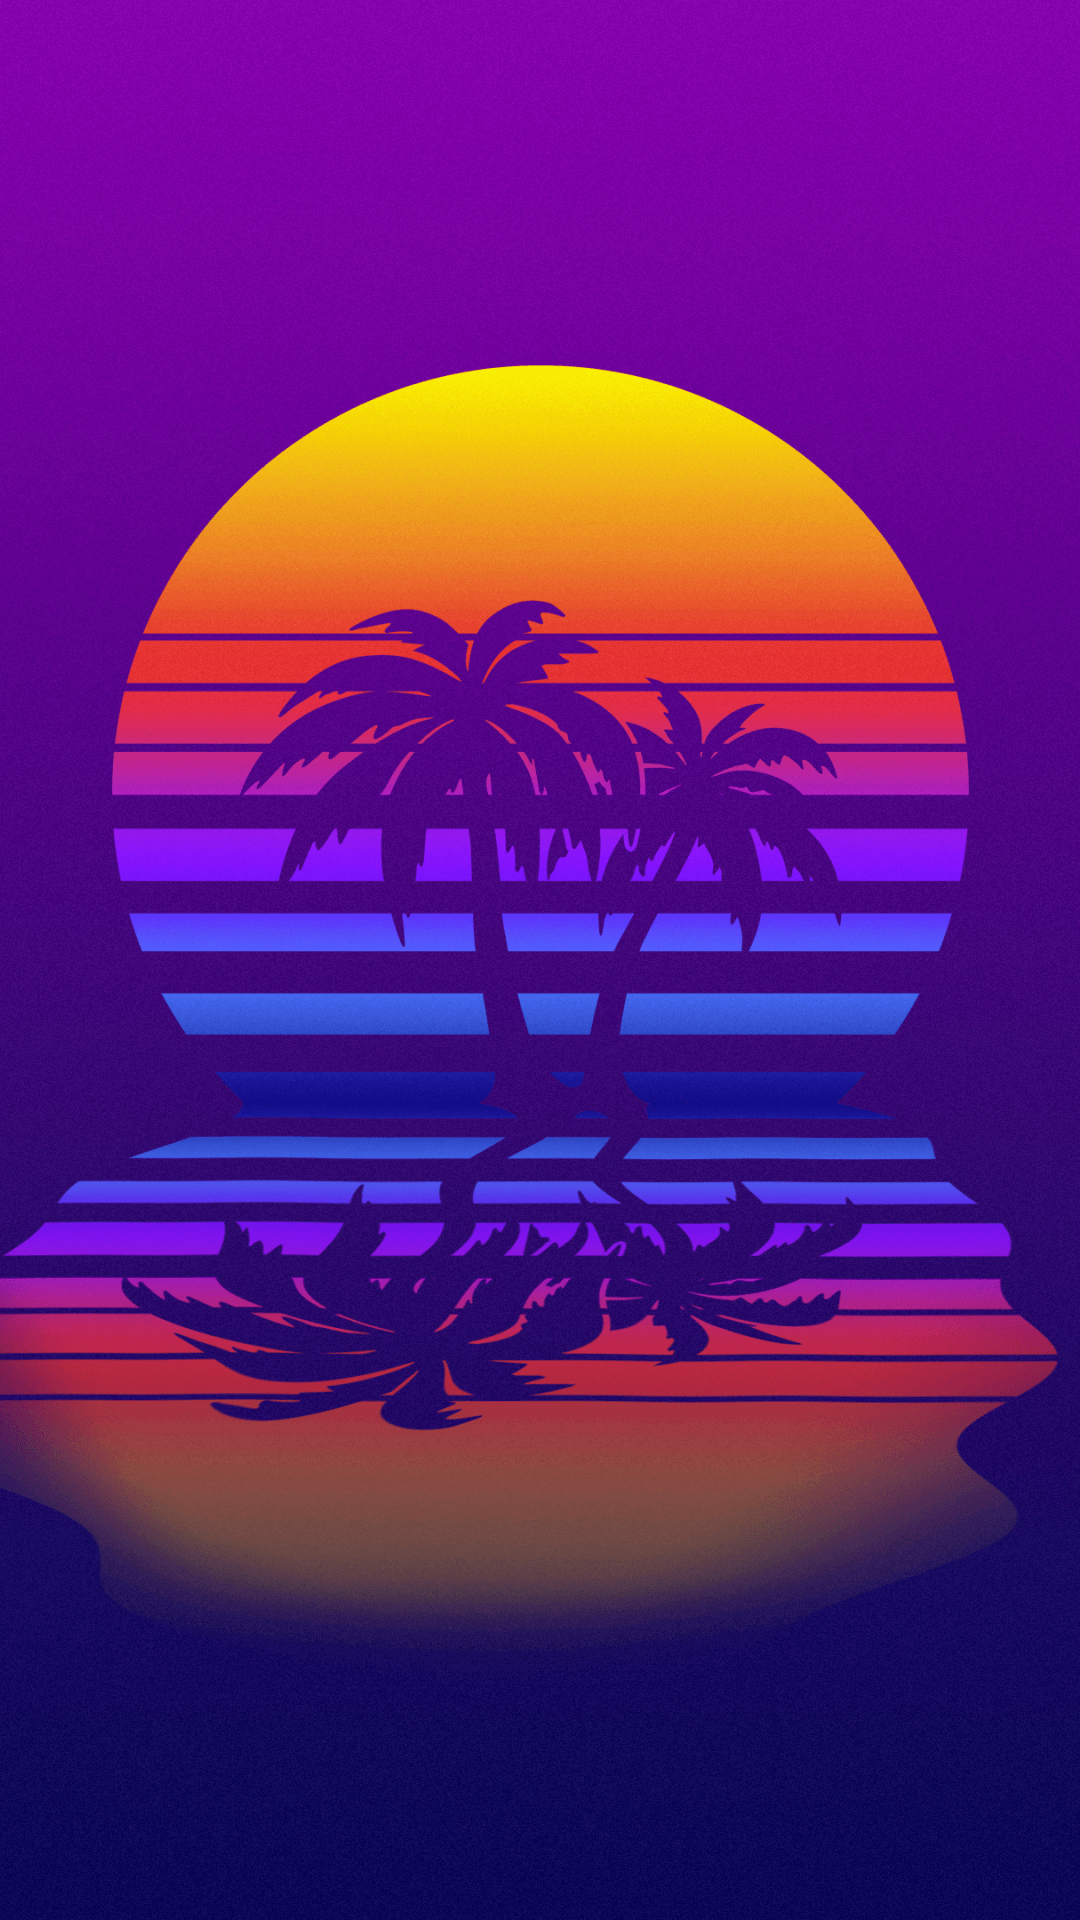 Synthwave, minimal, moon and palm tree Wallpaper. Vaporwave